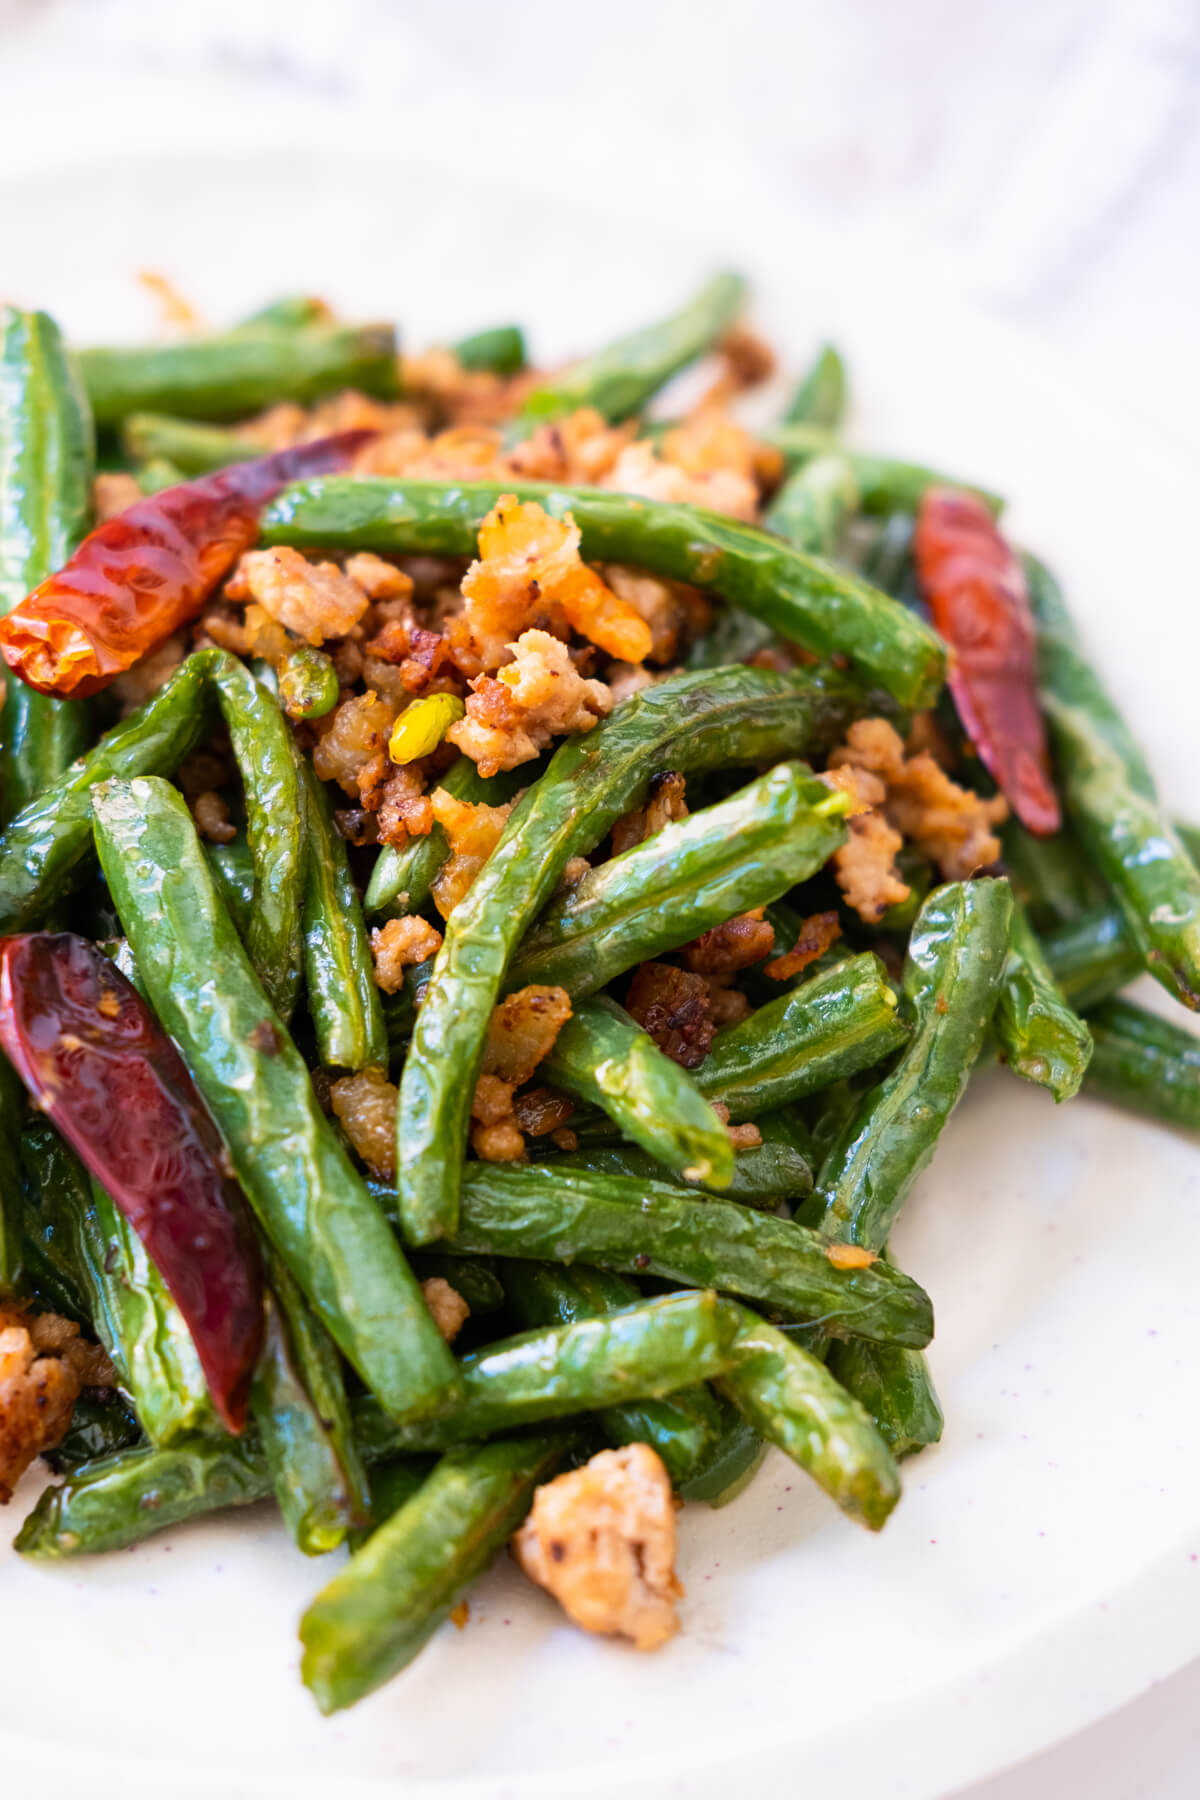 Deep-fried Sichuan green beans with dried shrimp, ground pork and dried chilies in a white platter.